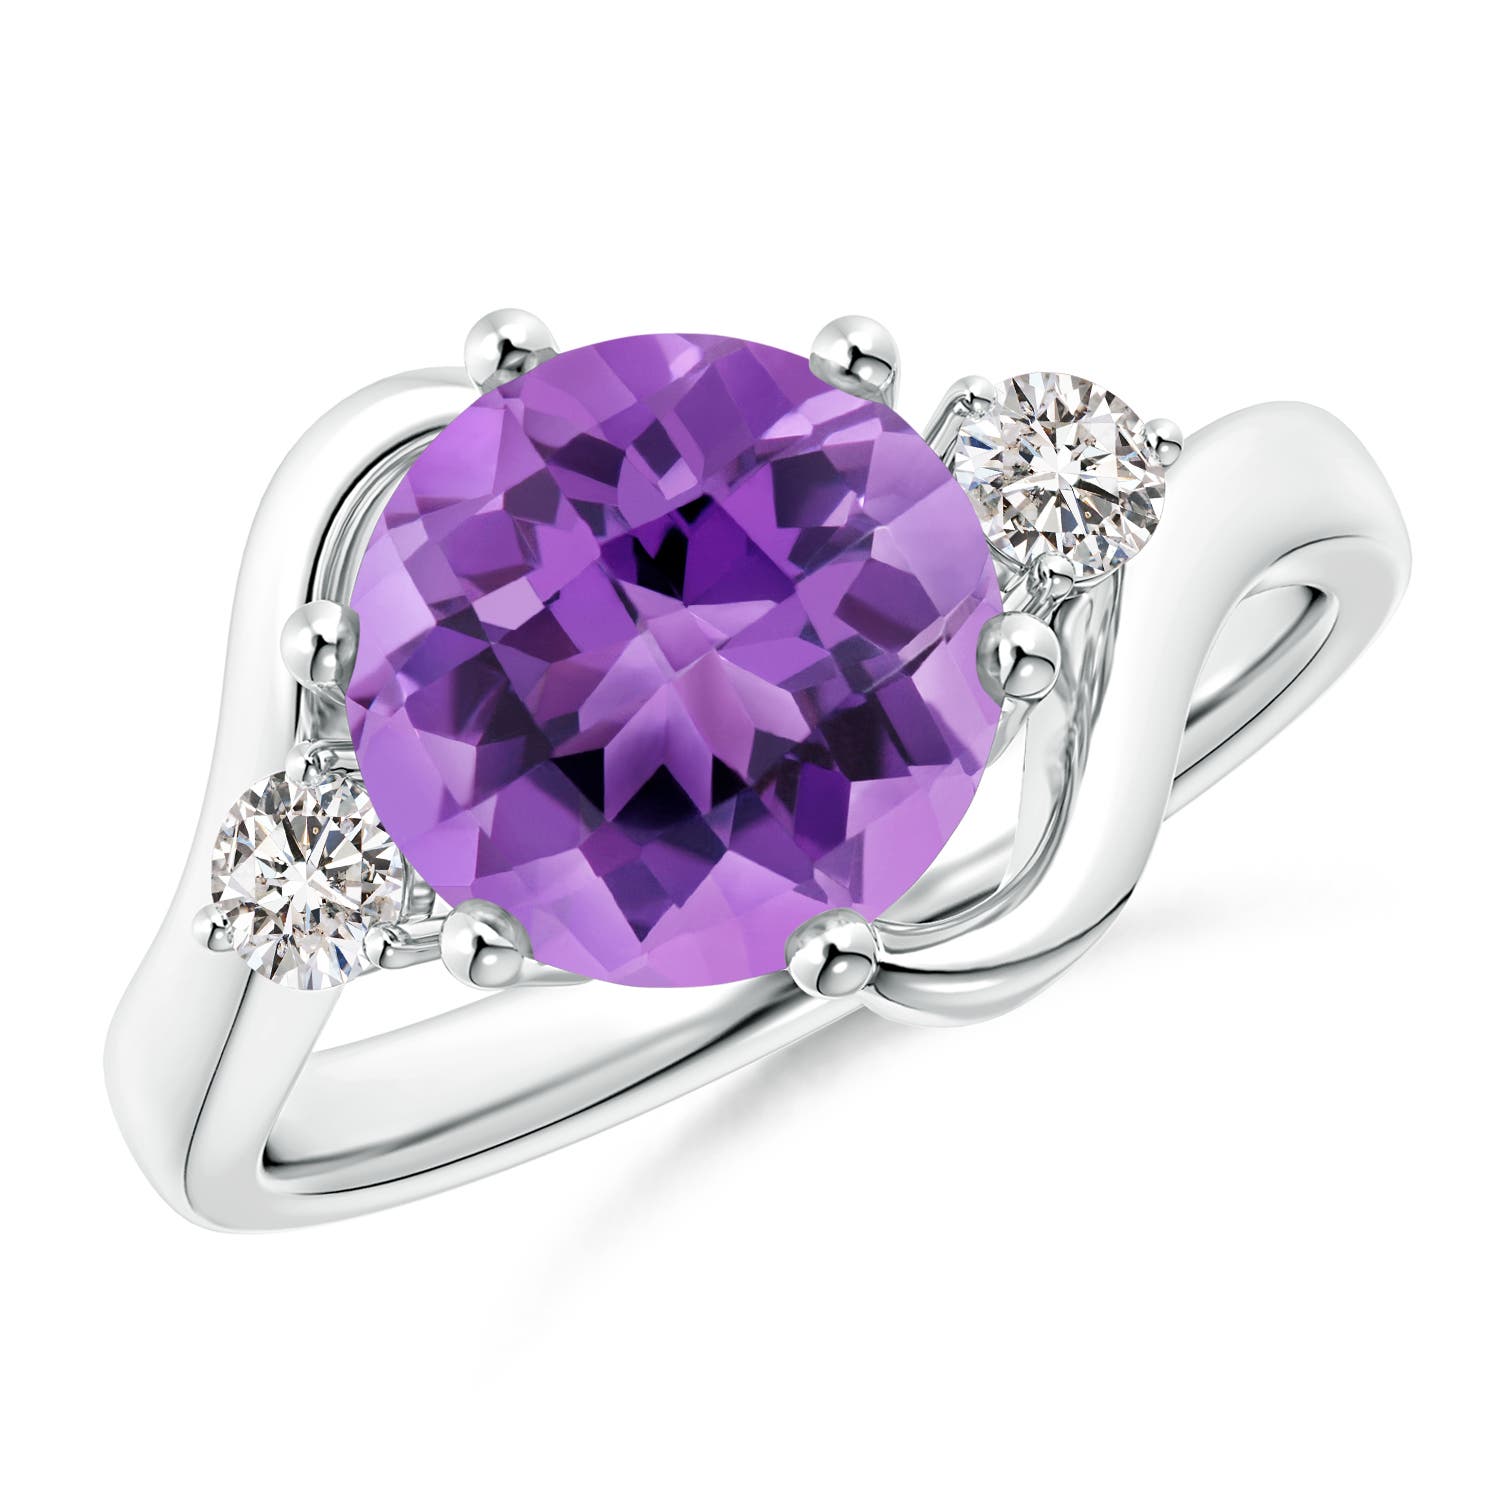 AA - Amethyst / 2.31 CT / 14 KT White Gold